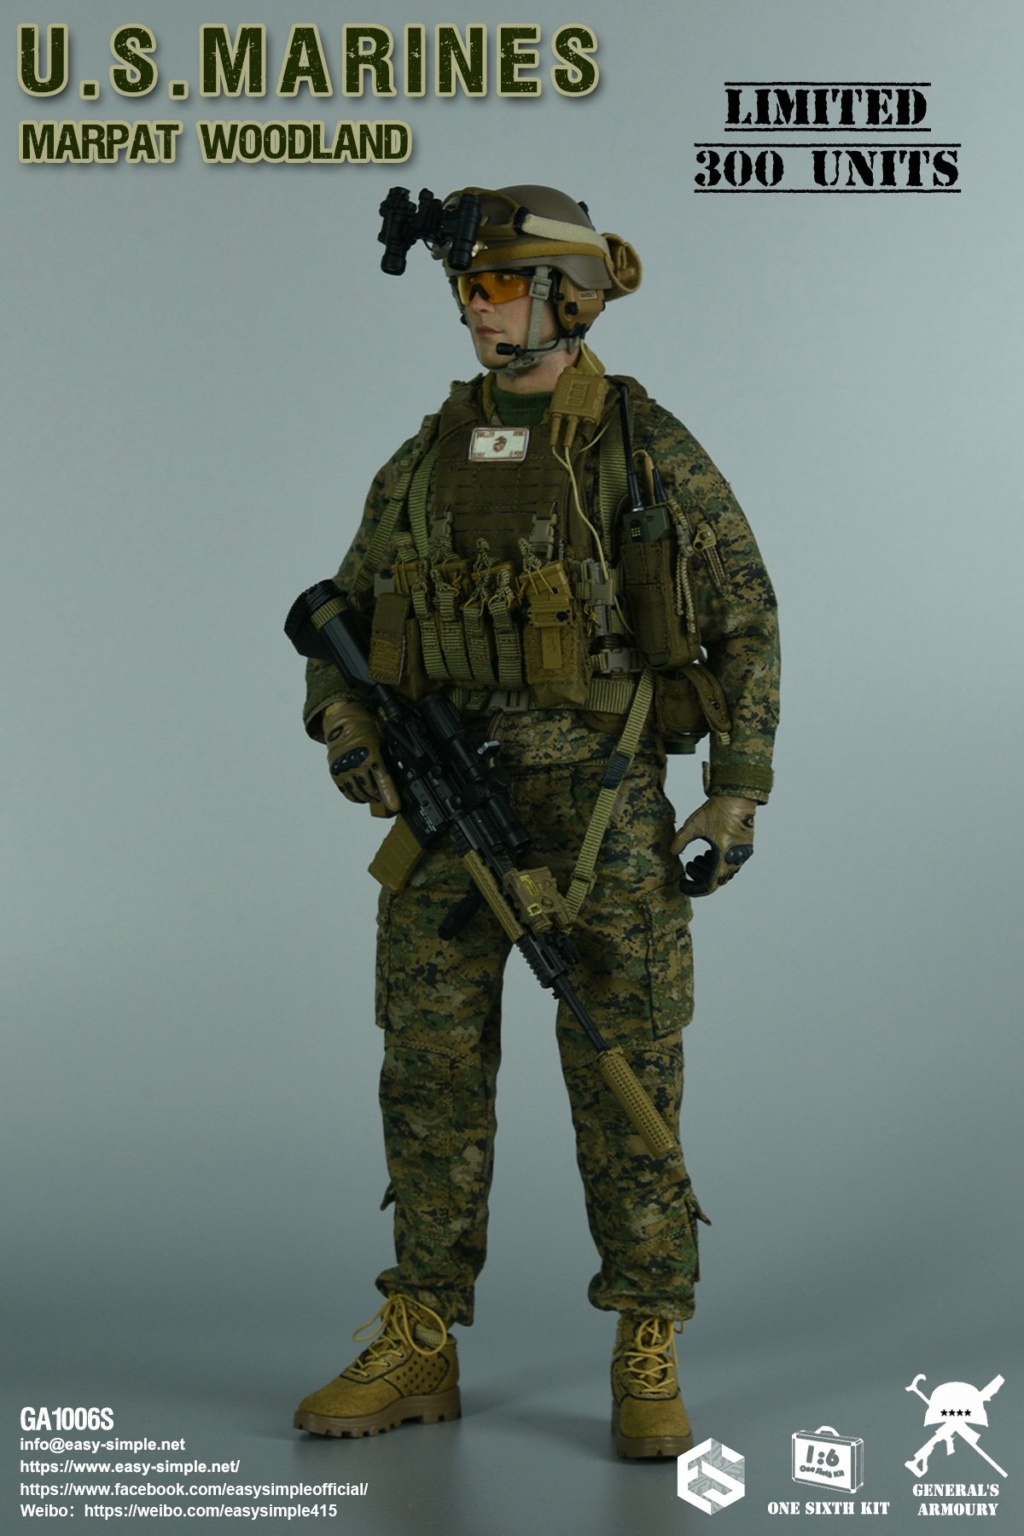 General - NEW PRODUCT: General‘s Armoury: GA1006S 1/6 Scale U.S. MARINES MARPAT WOODLAND (Limited 300 Units) 28694310